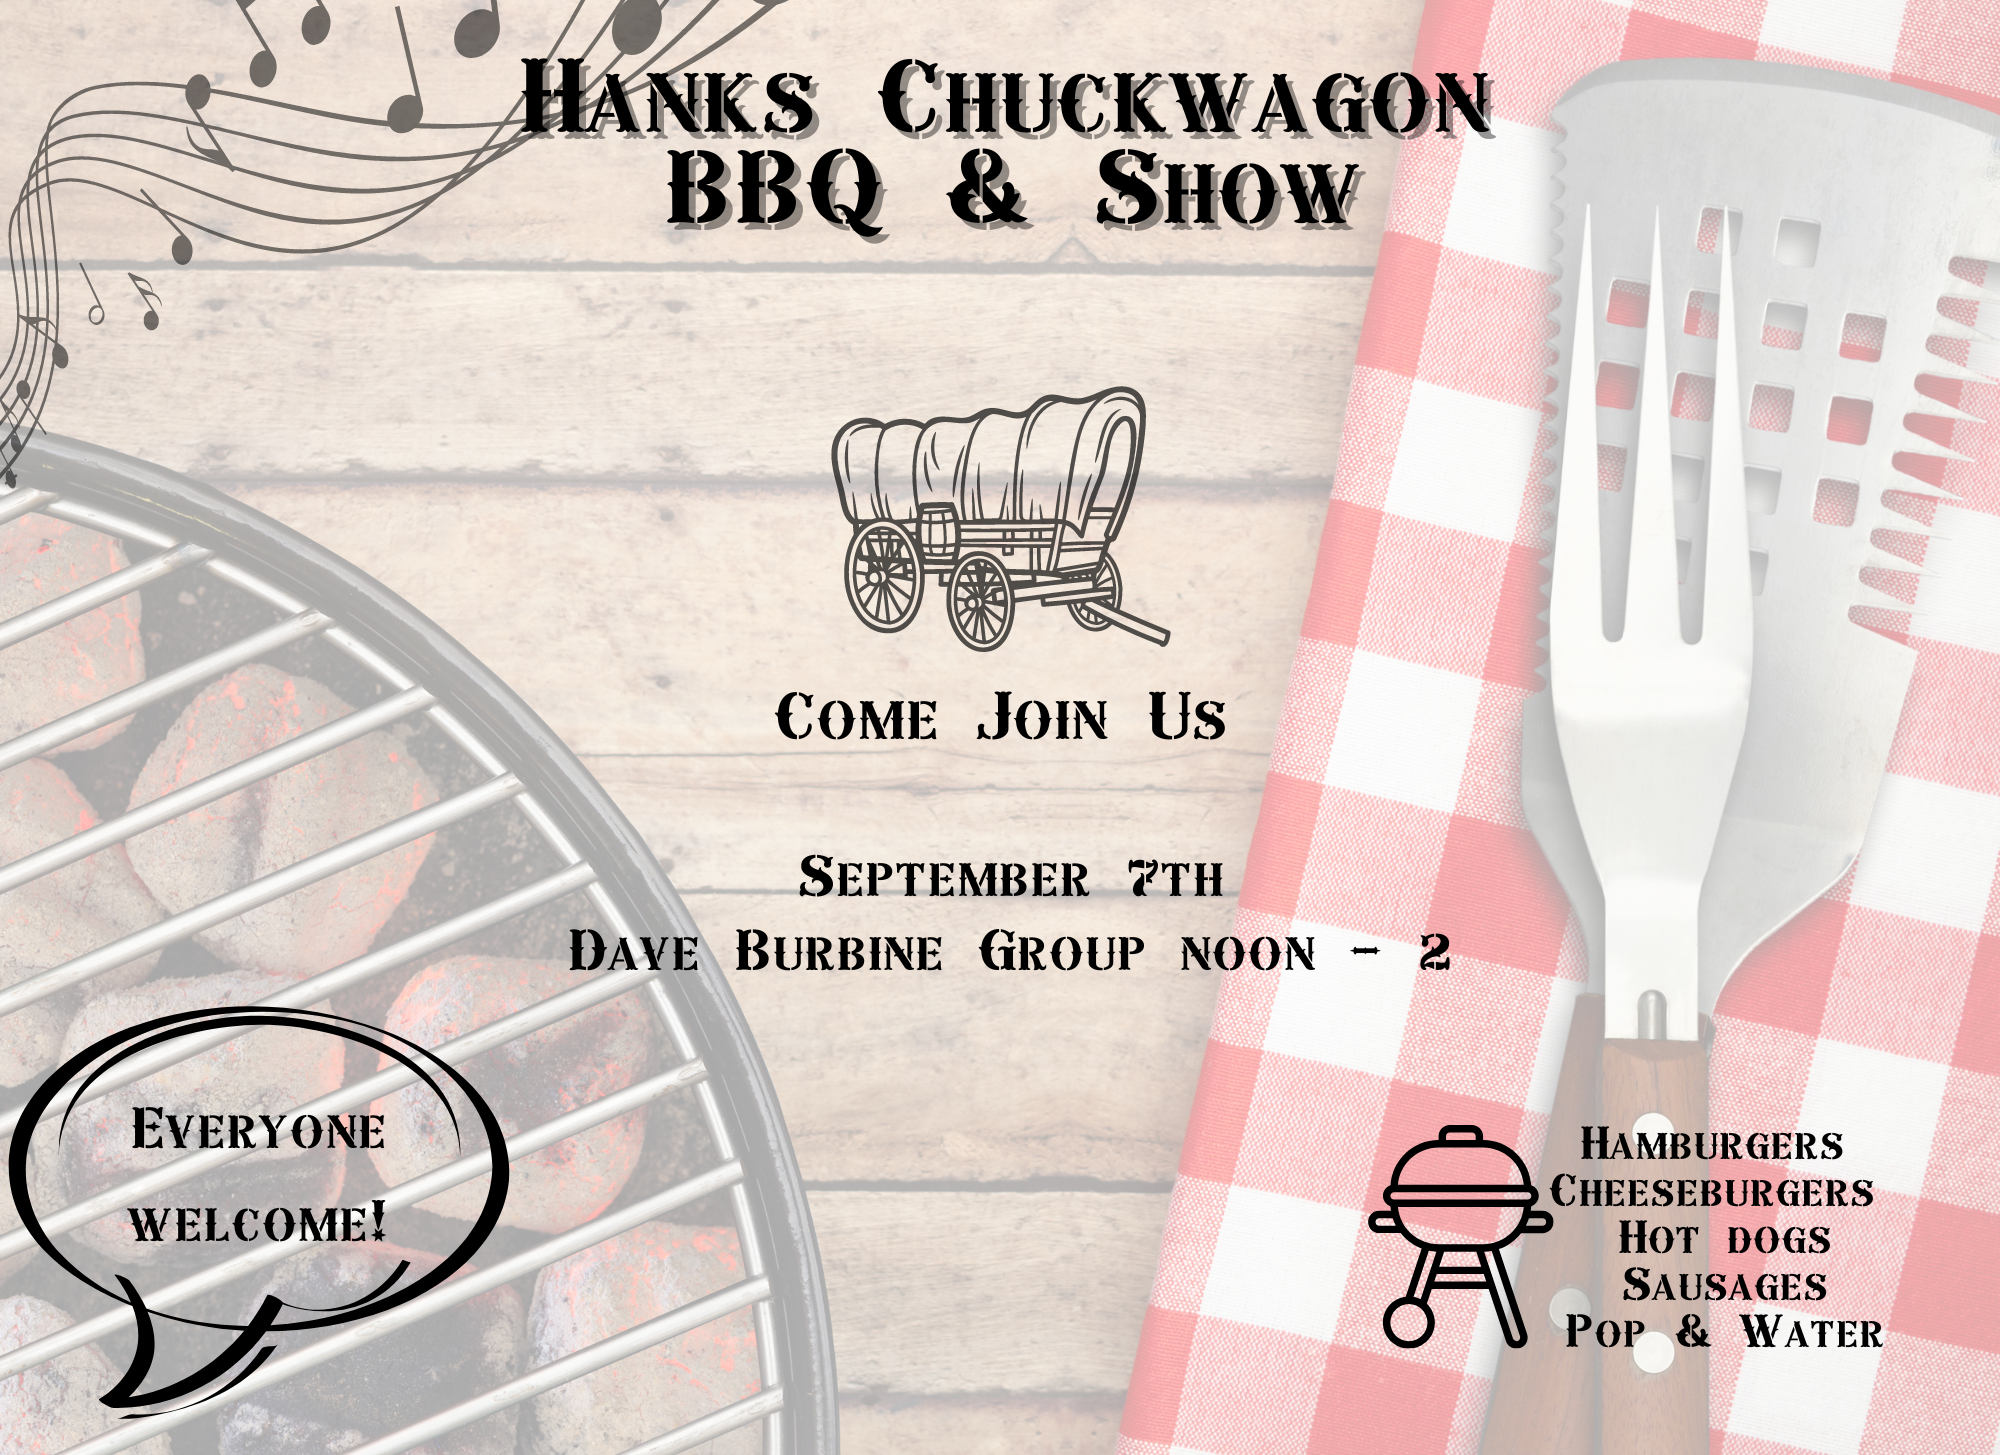 WEDNESDAY SEPT 7TH  BBQ & SHOW  FEATURES  DAVE BURBINE GROUP NOON – 2PM